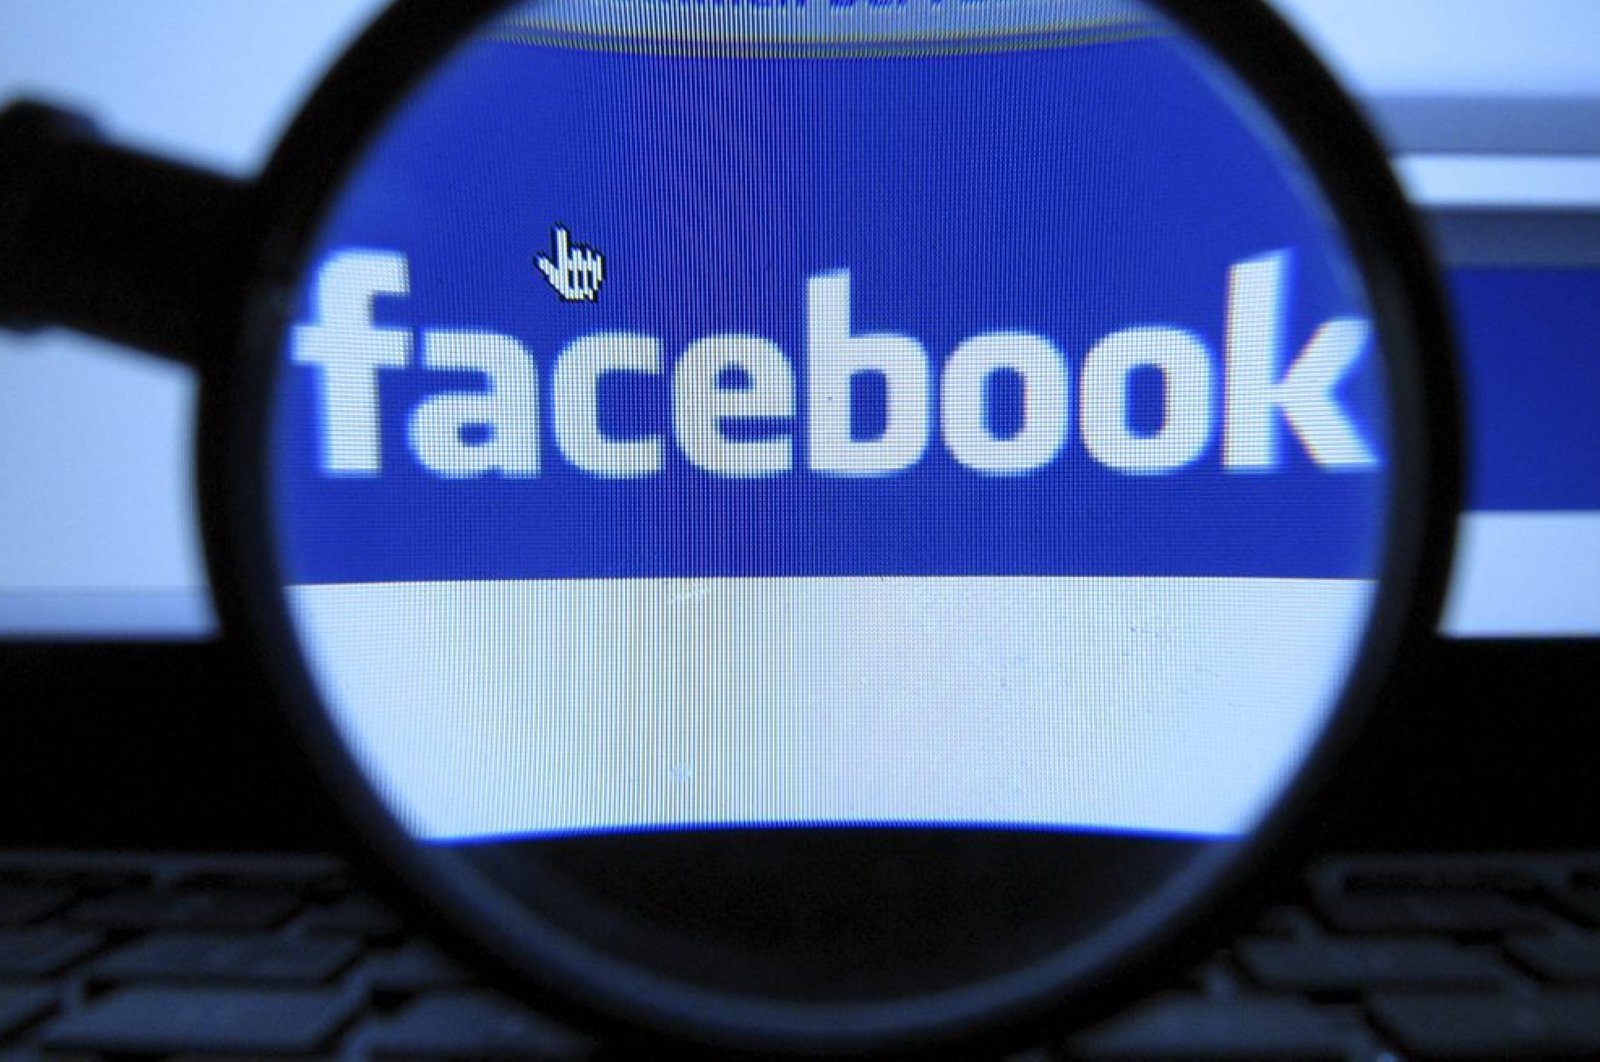 A magnifying glass is posed over a monitor displaying a Facebook page in Munich, Oct. 10, 2011. (AP Photo)